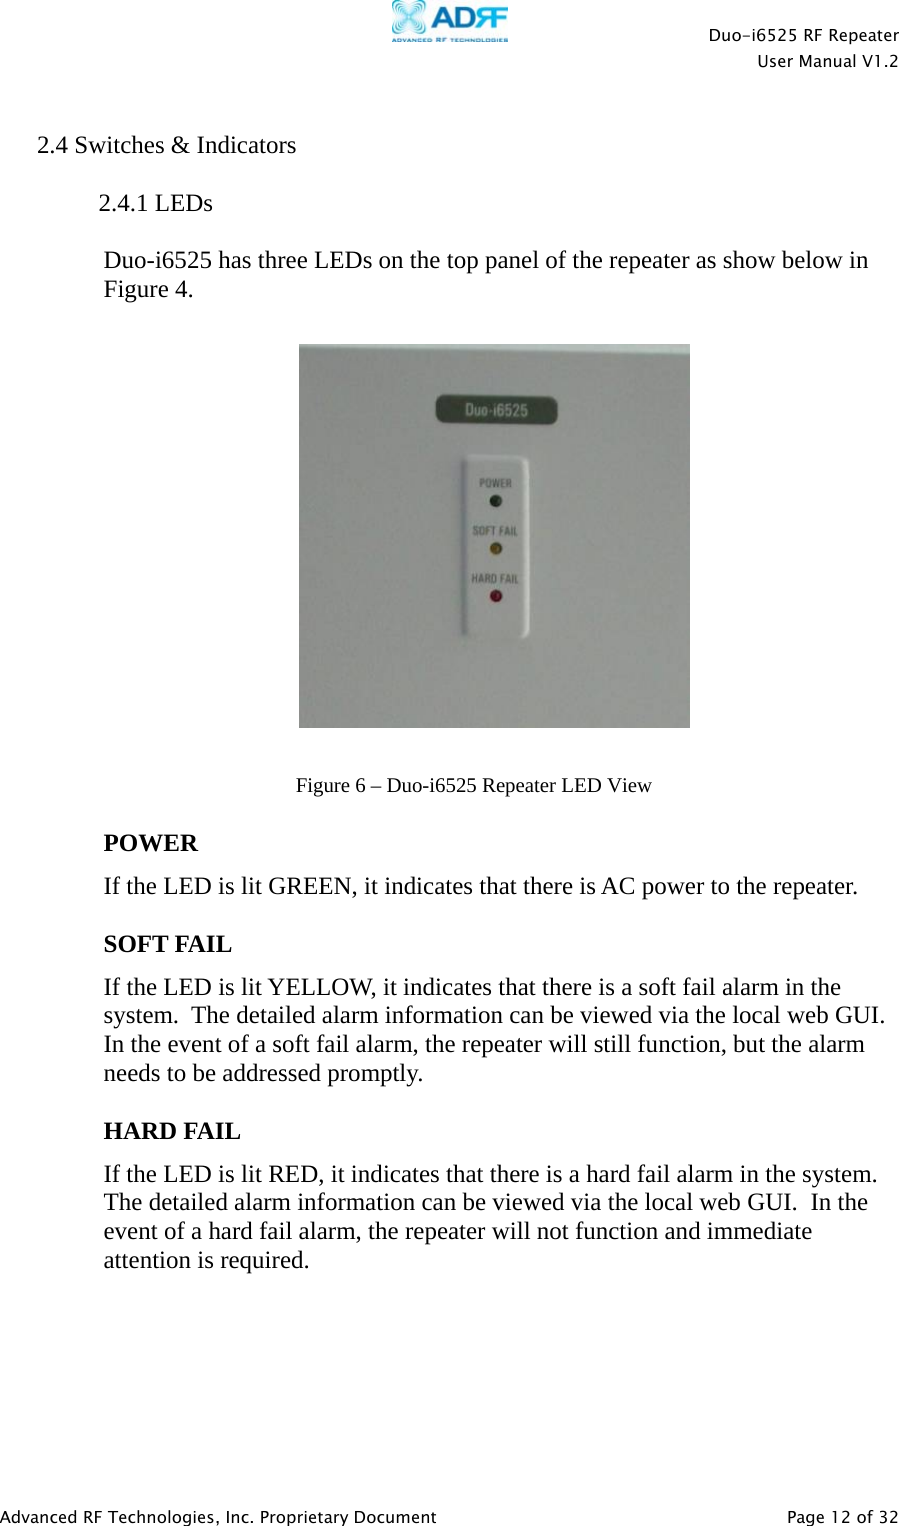    Duo-i6525 RF Repeater  User Manual V1.2  Advanced RF Technologies, Inc. Proprietary Document   Page 12 of 32   2.4 Switches &amp; Indicators  2.4.1 LEDs  Duo-i6525 has three LEDs on the top panel of the repeater as show below in Figure 4.      POWER If the LED is lit GREEN, it indicates that there is AC power to the repeater.   SOFT FAIL If the LED is lit YELLOW, it indicates that there is a soft fail alarm in the system.  The detailed alarm information can be viewed via the local web GUI.  In the event of a soft fail alarm, the repeater will still function, but the alarm needs to be addressed promptly.  HARD FAIL If the LED is lit RED, it indicates that there is a hard fail alarm in the system.  The detailed alarm information can be viewed via the local web GUI.  In the event of a hard fail alarm, the repeater will not function and immediate attention is required.       Figure 6 – Duo-i6525 Repeater LED View 